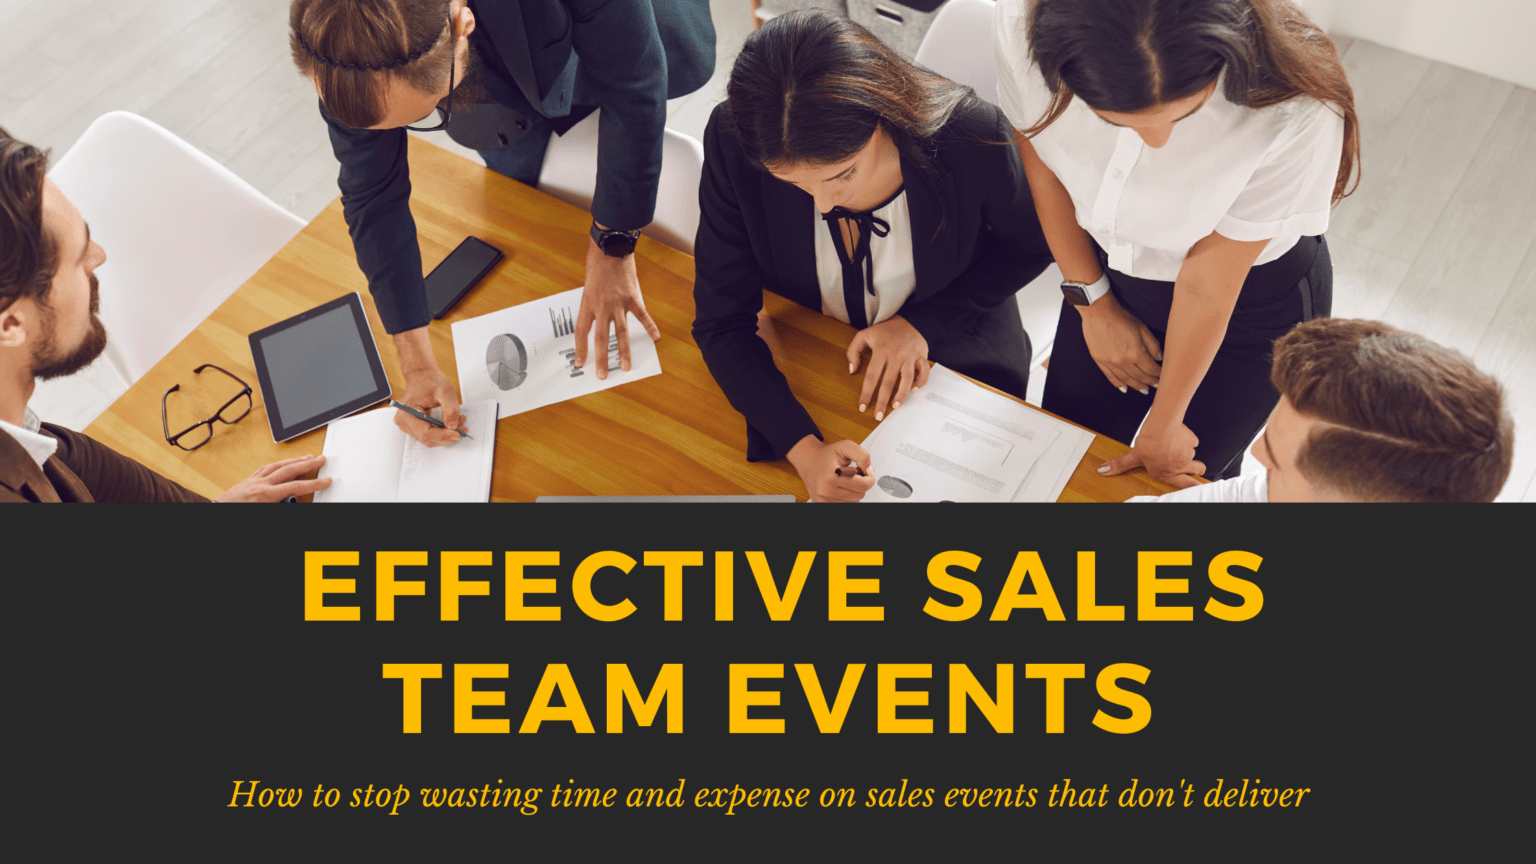 Unleashing The Power Of Effective Sales Team Events: Stop Wasting Time And Expense